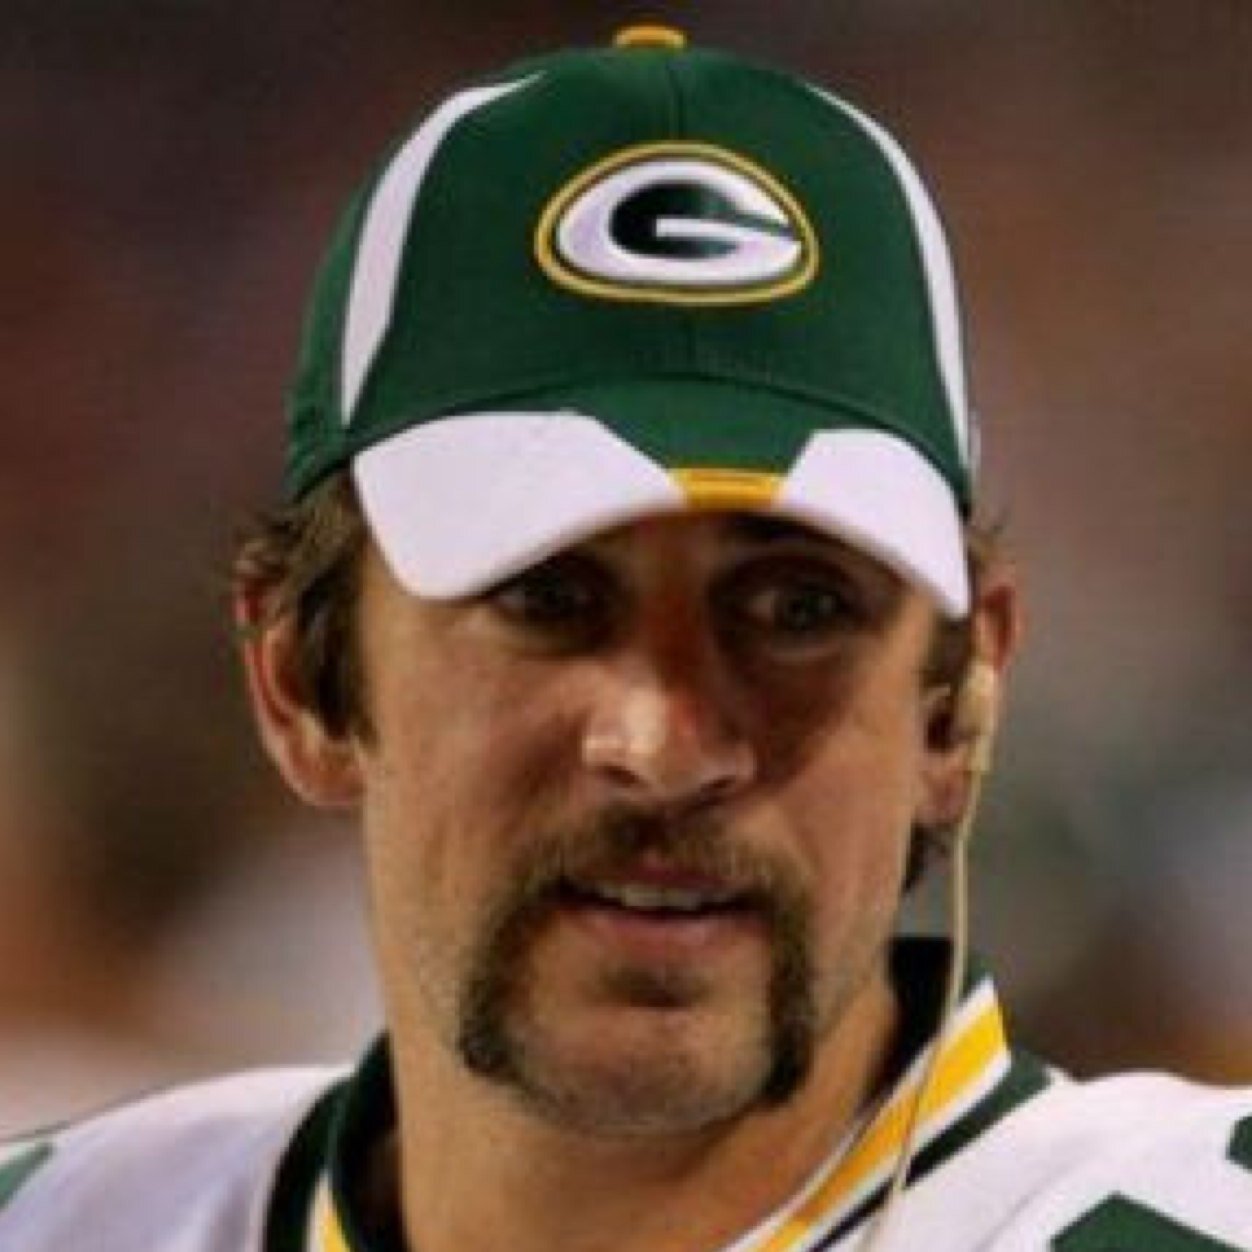 Facial hair of Green Bay Packers QB Aaron Rodgers. Parody account. Not affiliated with Aaron Rodgers